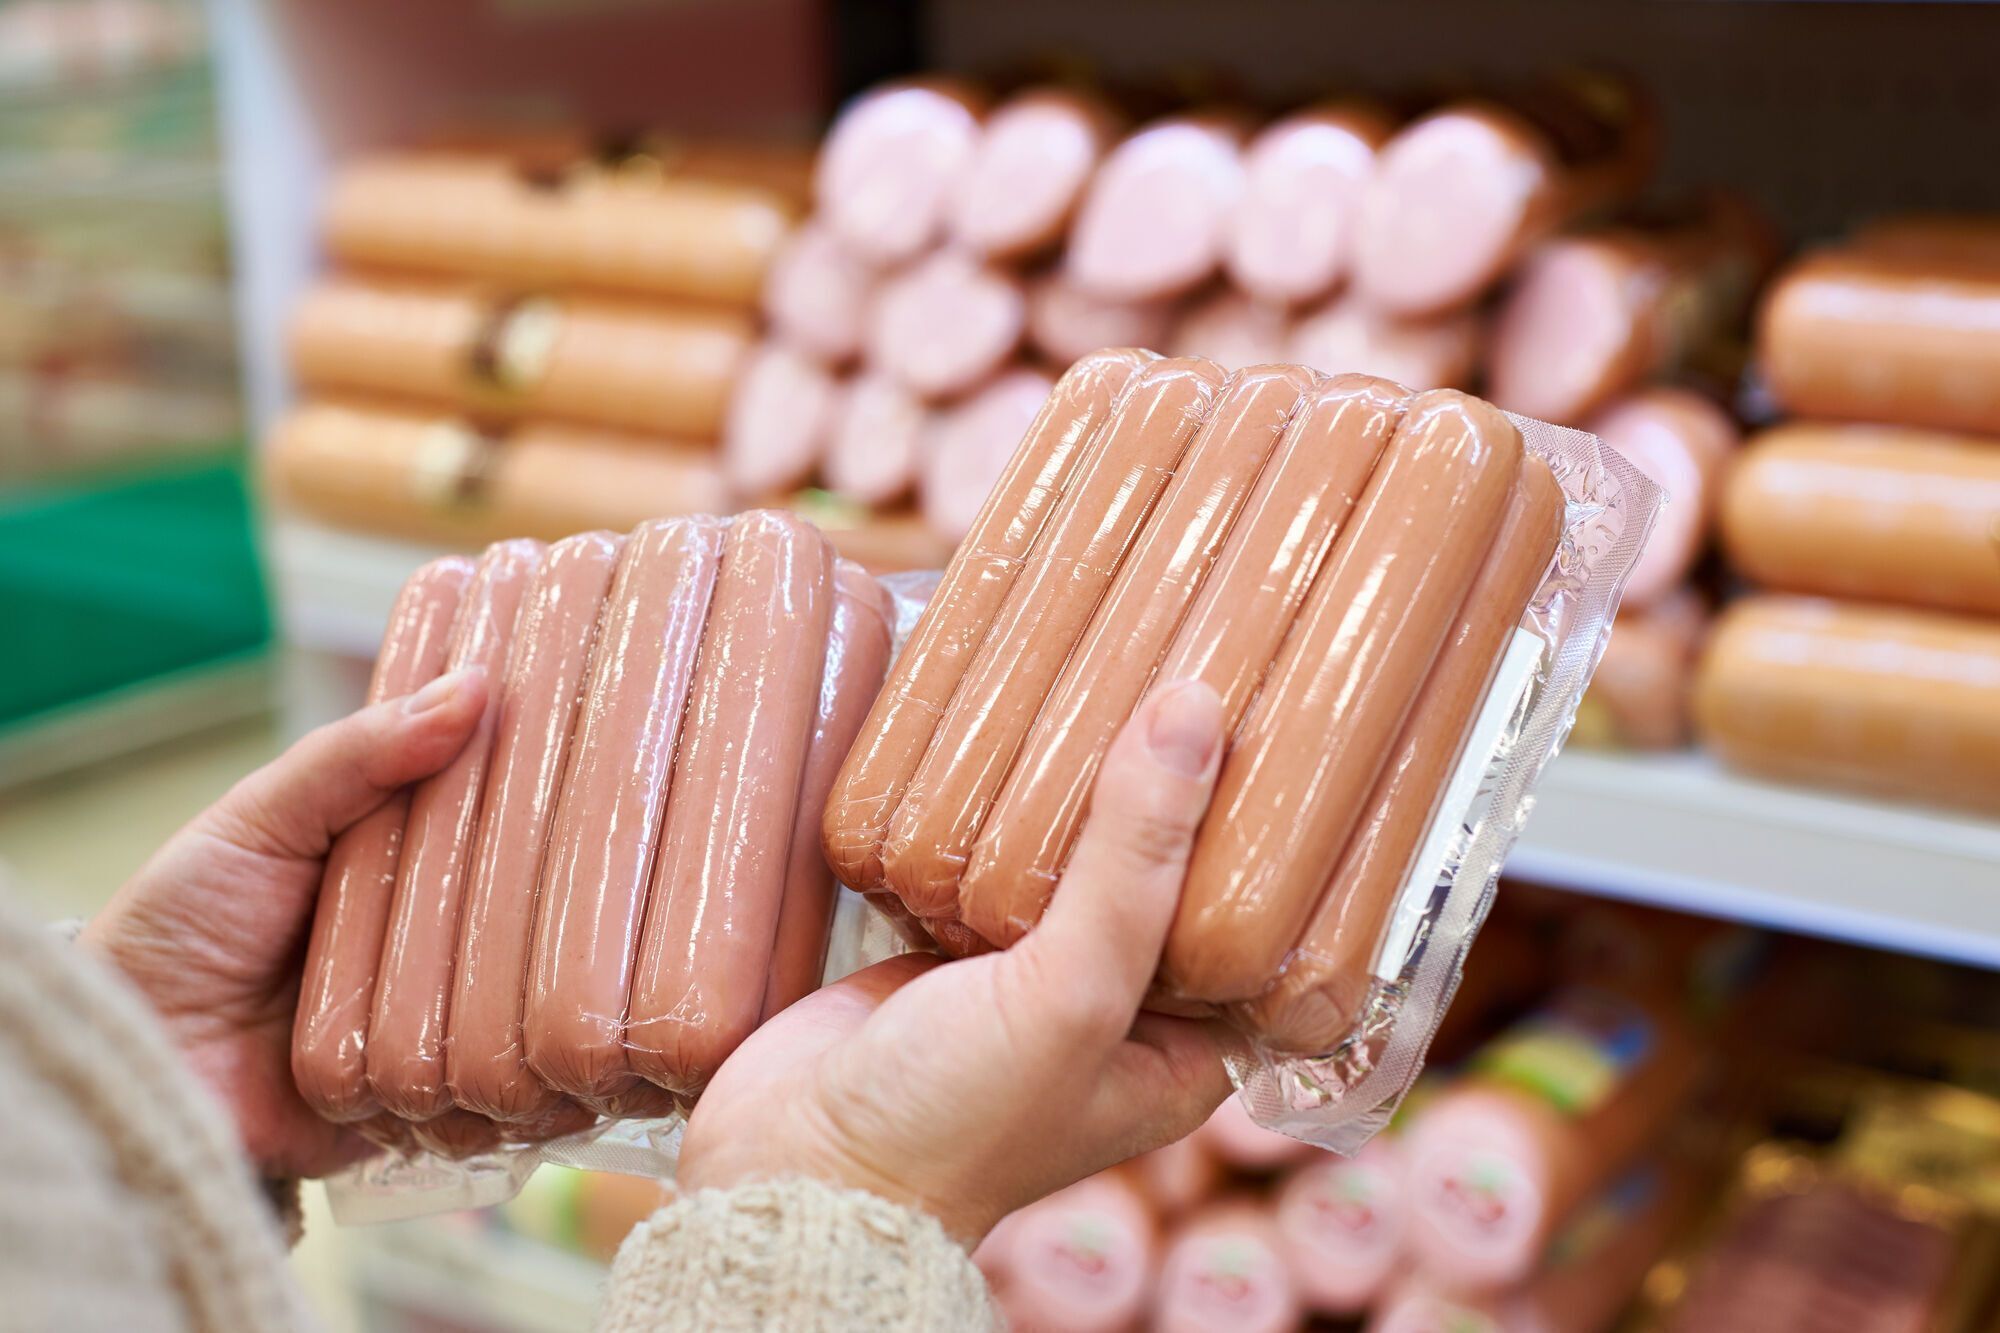 How to choose quality sausages in the store: pay special attention to these signs